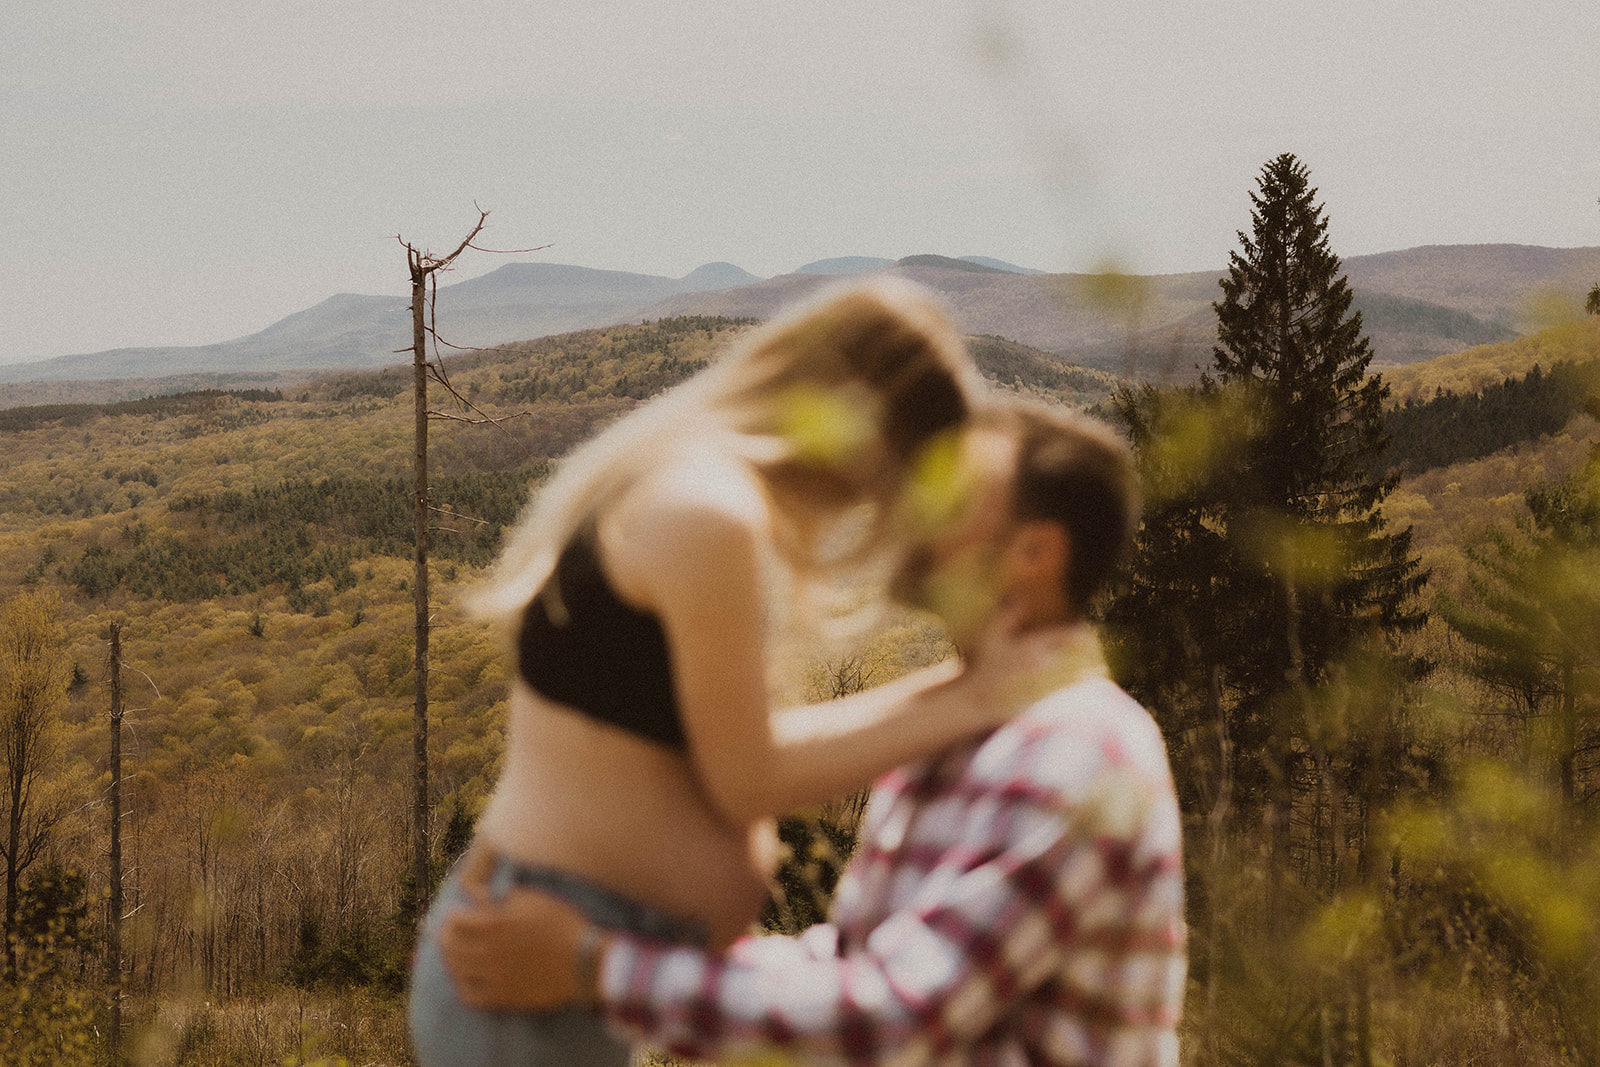 Future parents pose intimately together during their nature maternity photos